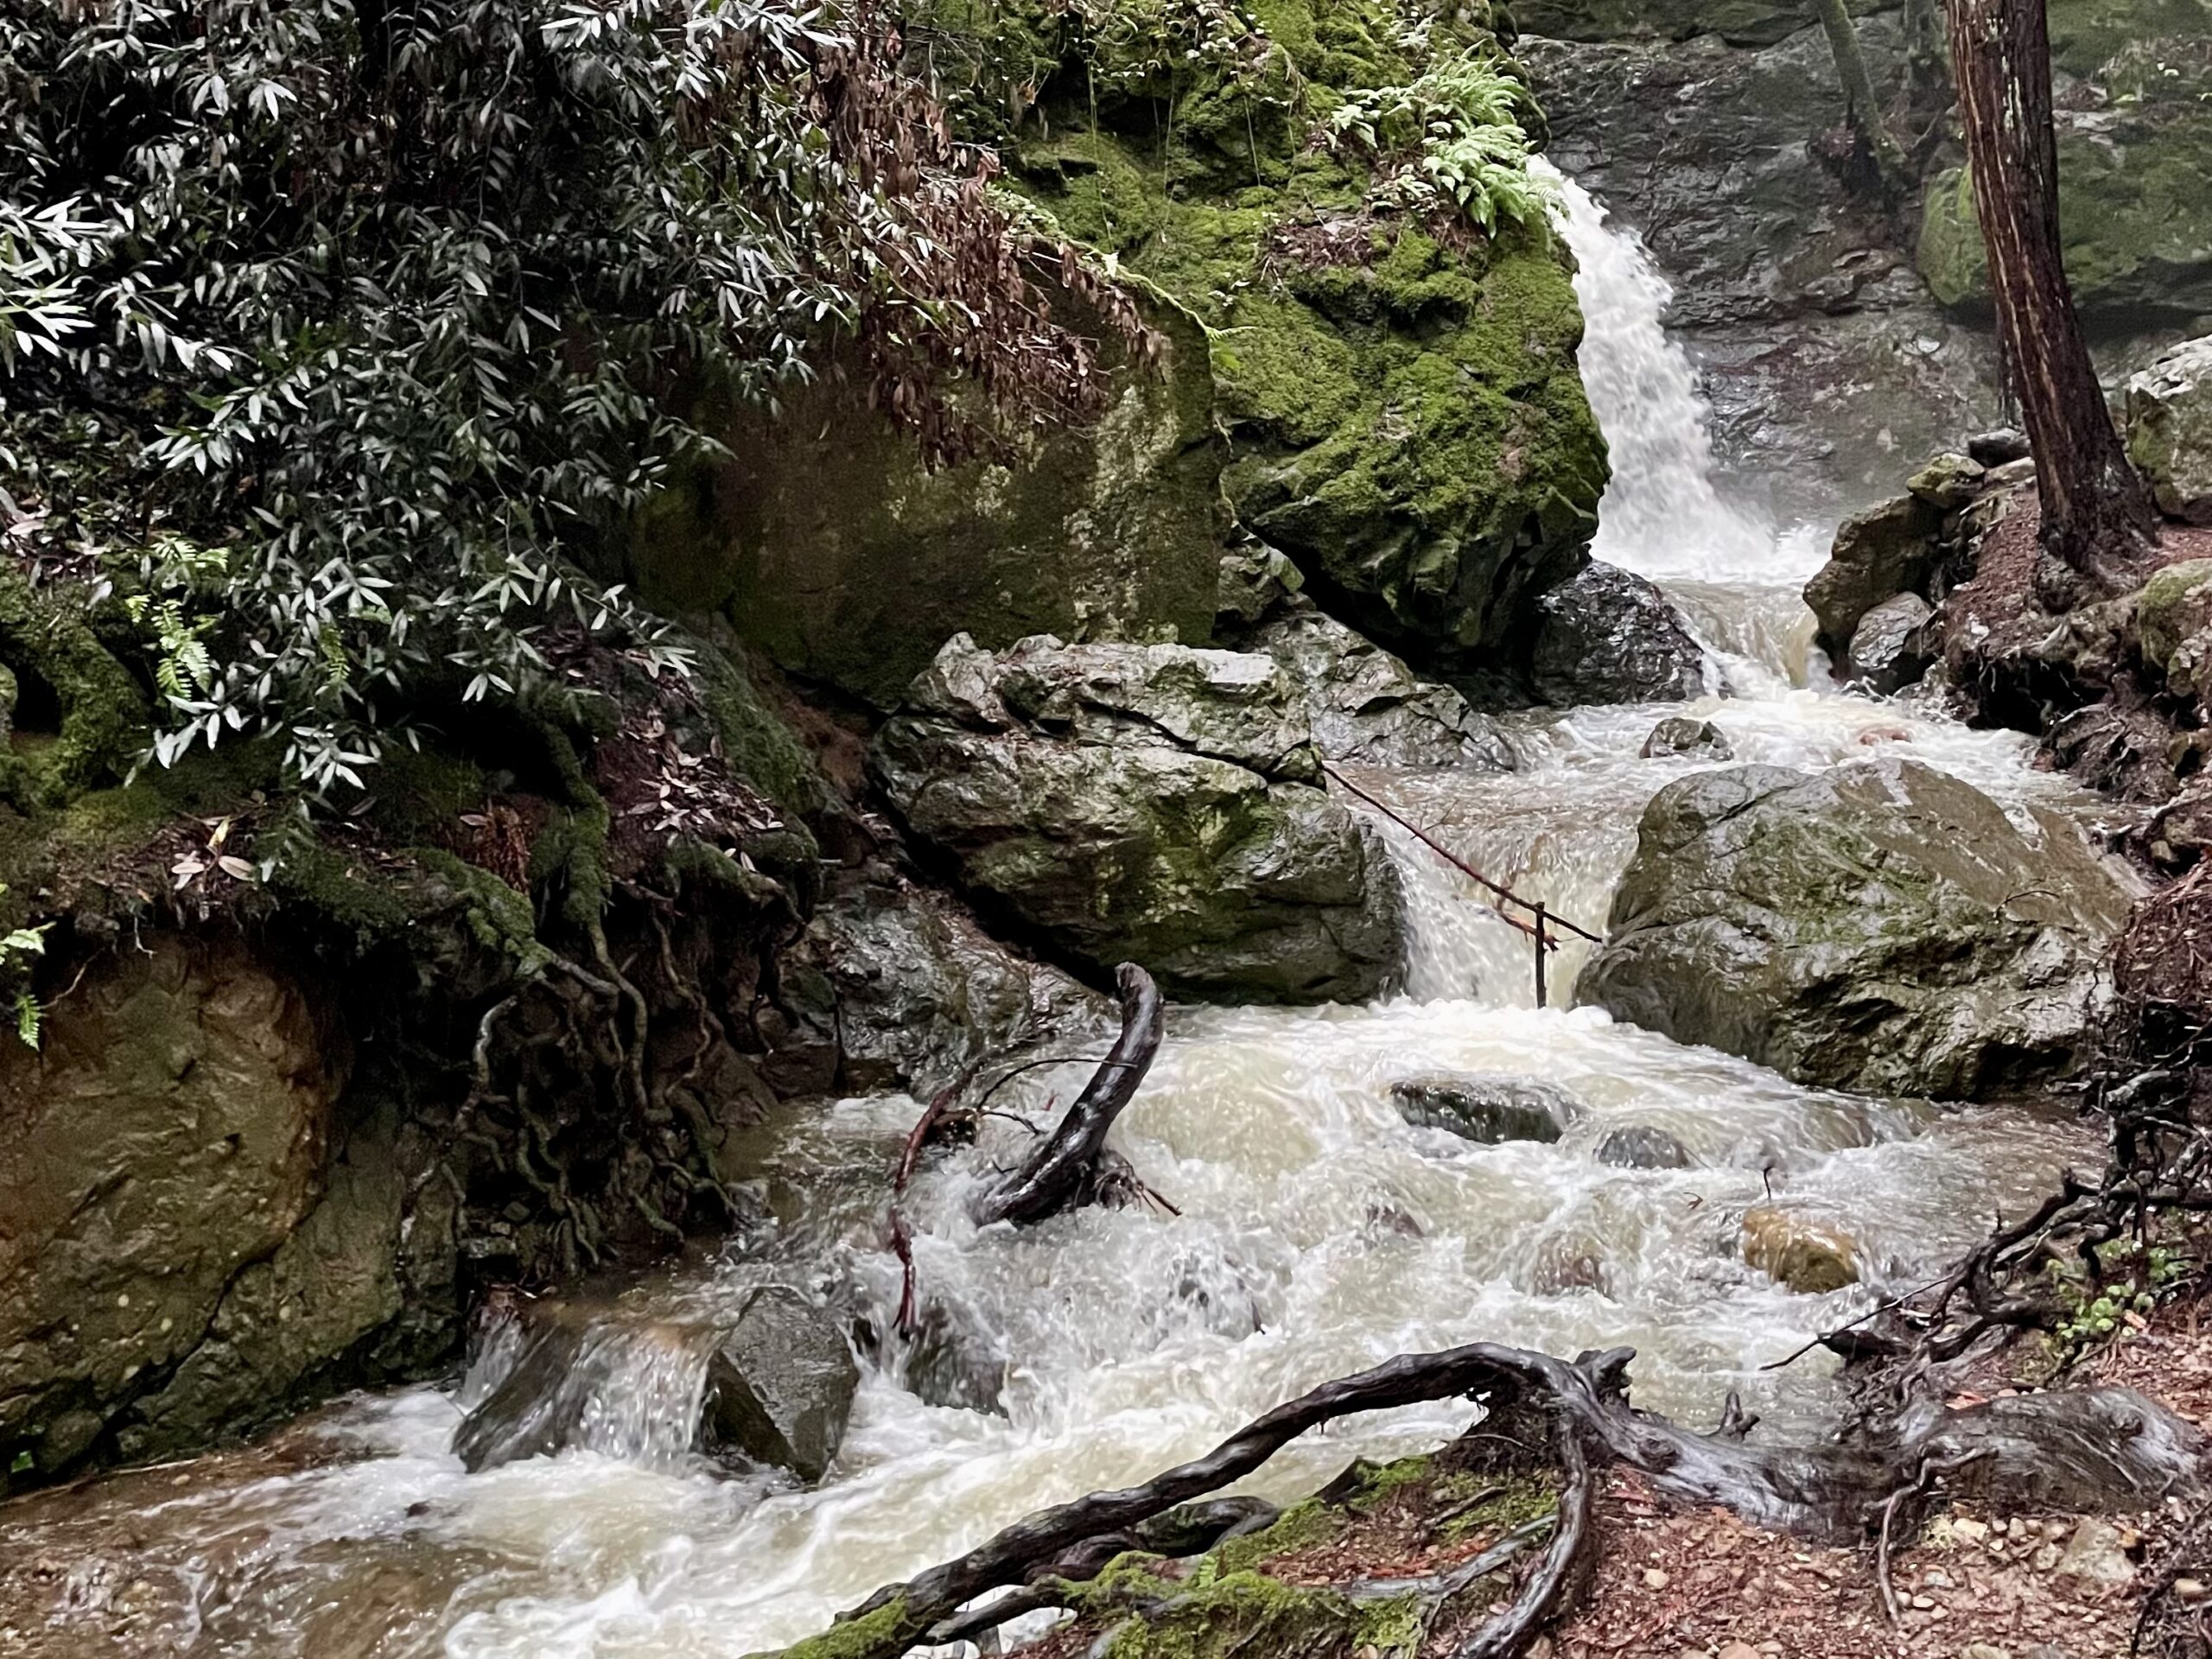 Rapids flow over rocky terrain, surrounded by lush greenery and moss-covered stones.